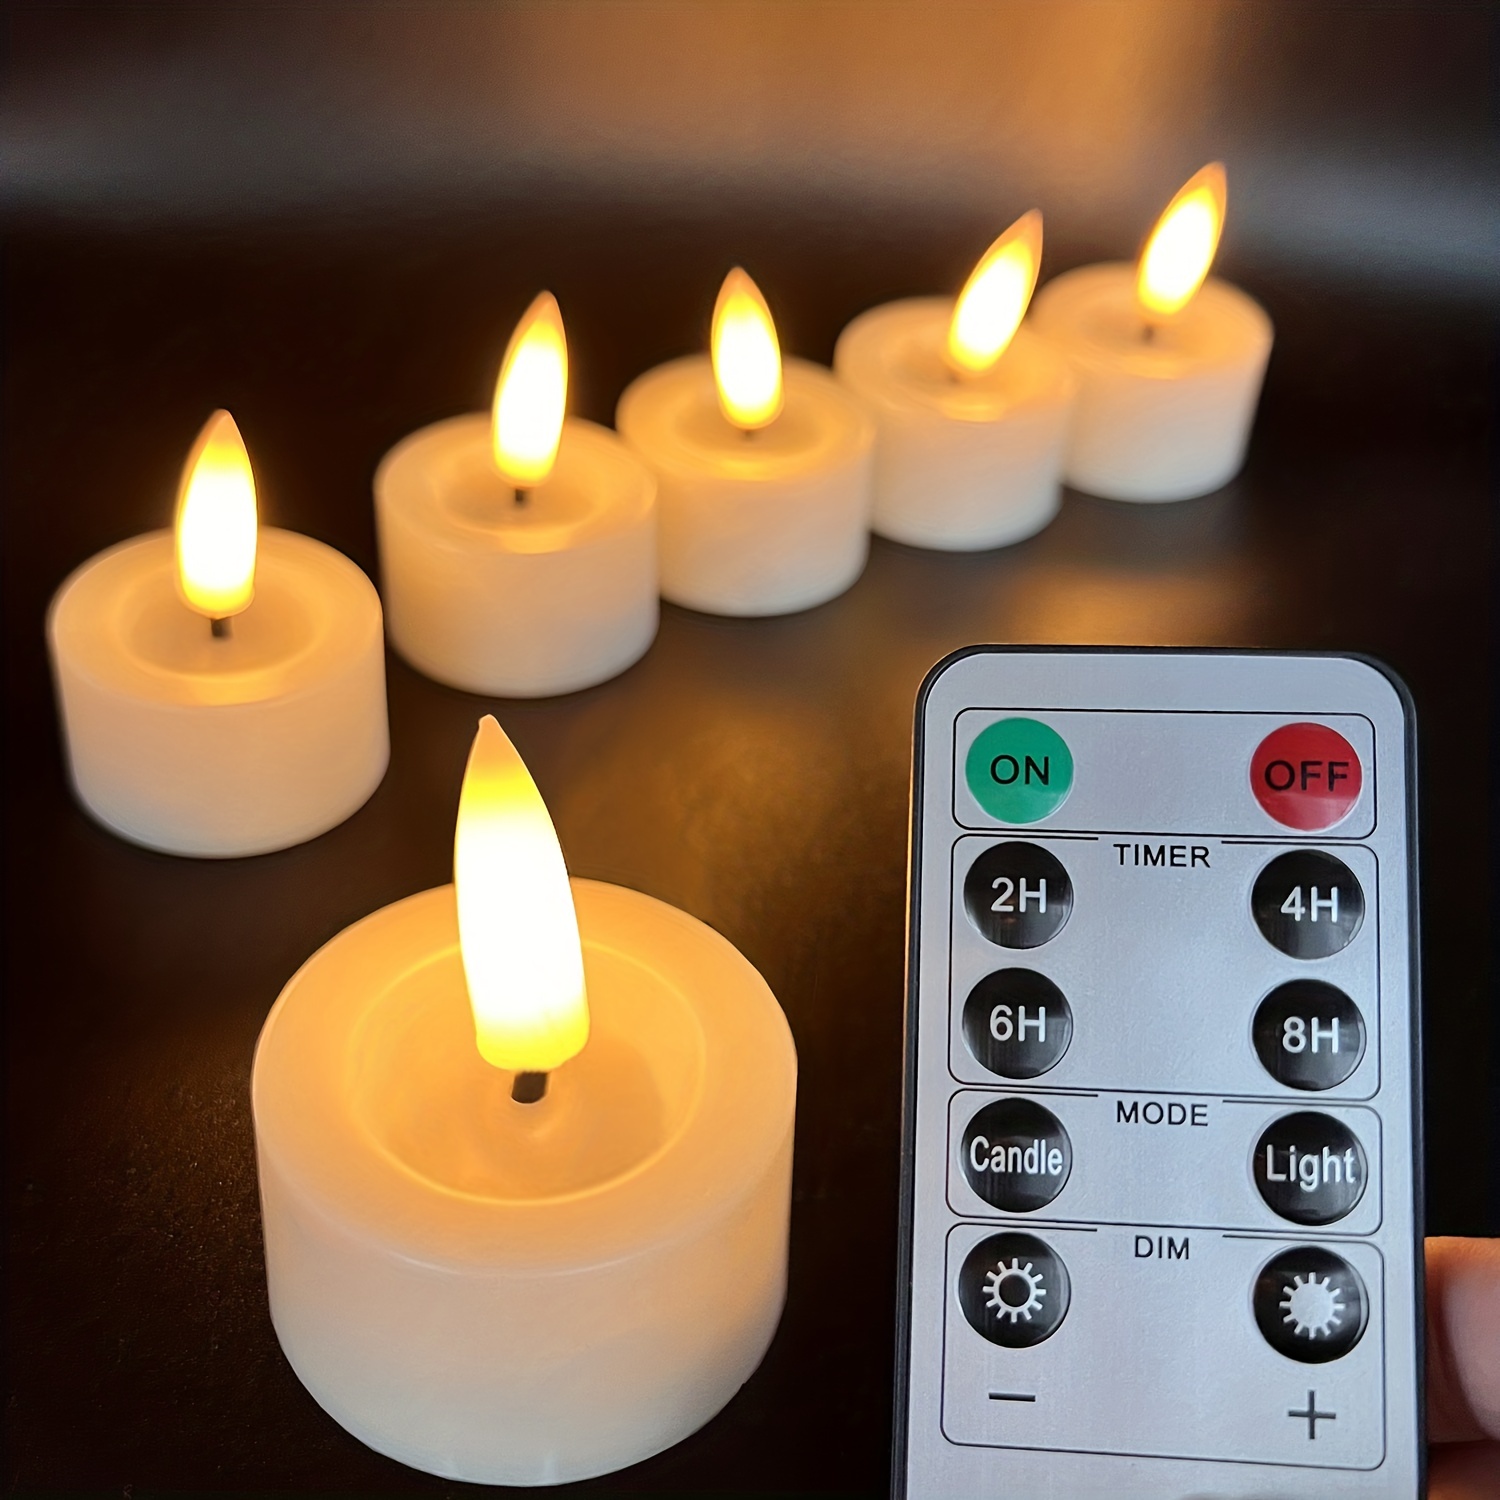 

6pcs 3d Black Wick Led Flameless Battery Operated Tea Lights Candles With Remote Control, Romantic Valentine's Day Decor Flickering Votive Tea Light Candle For Special Night, Timer Tealight